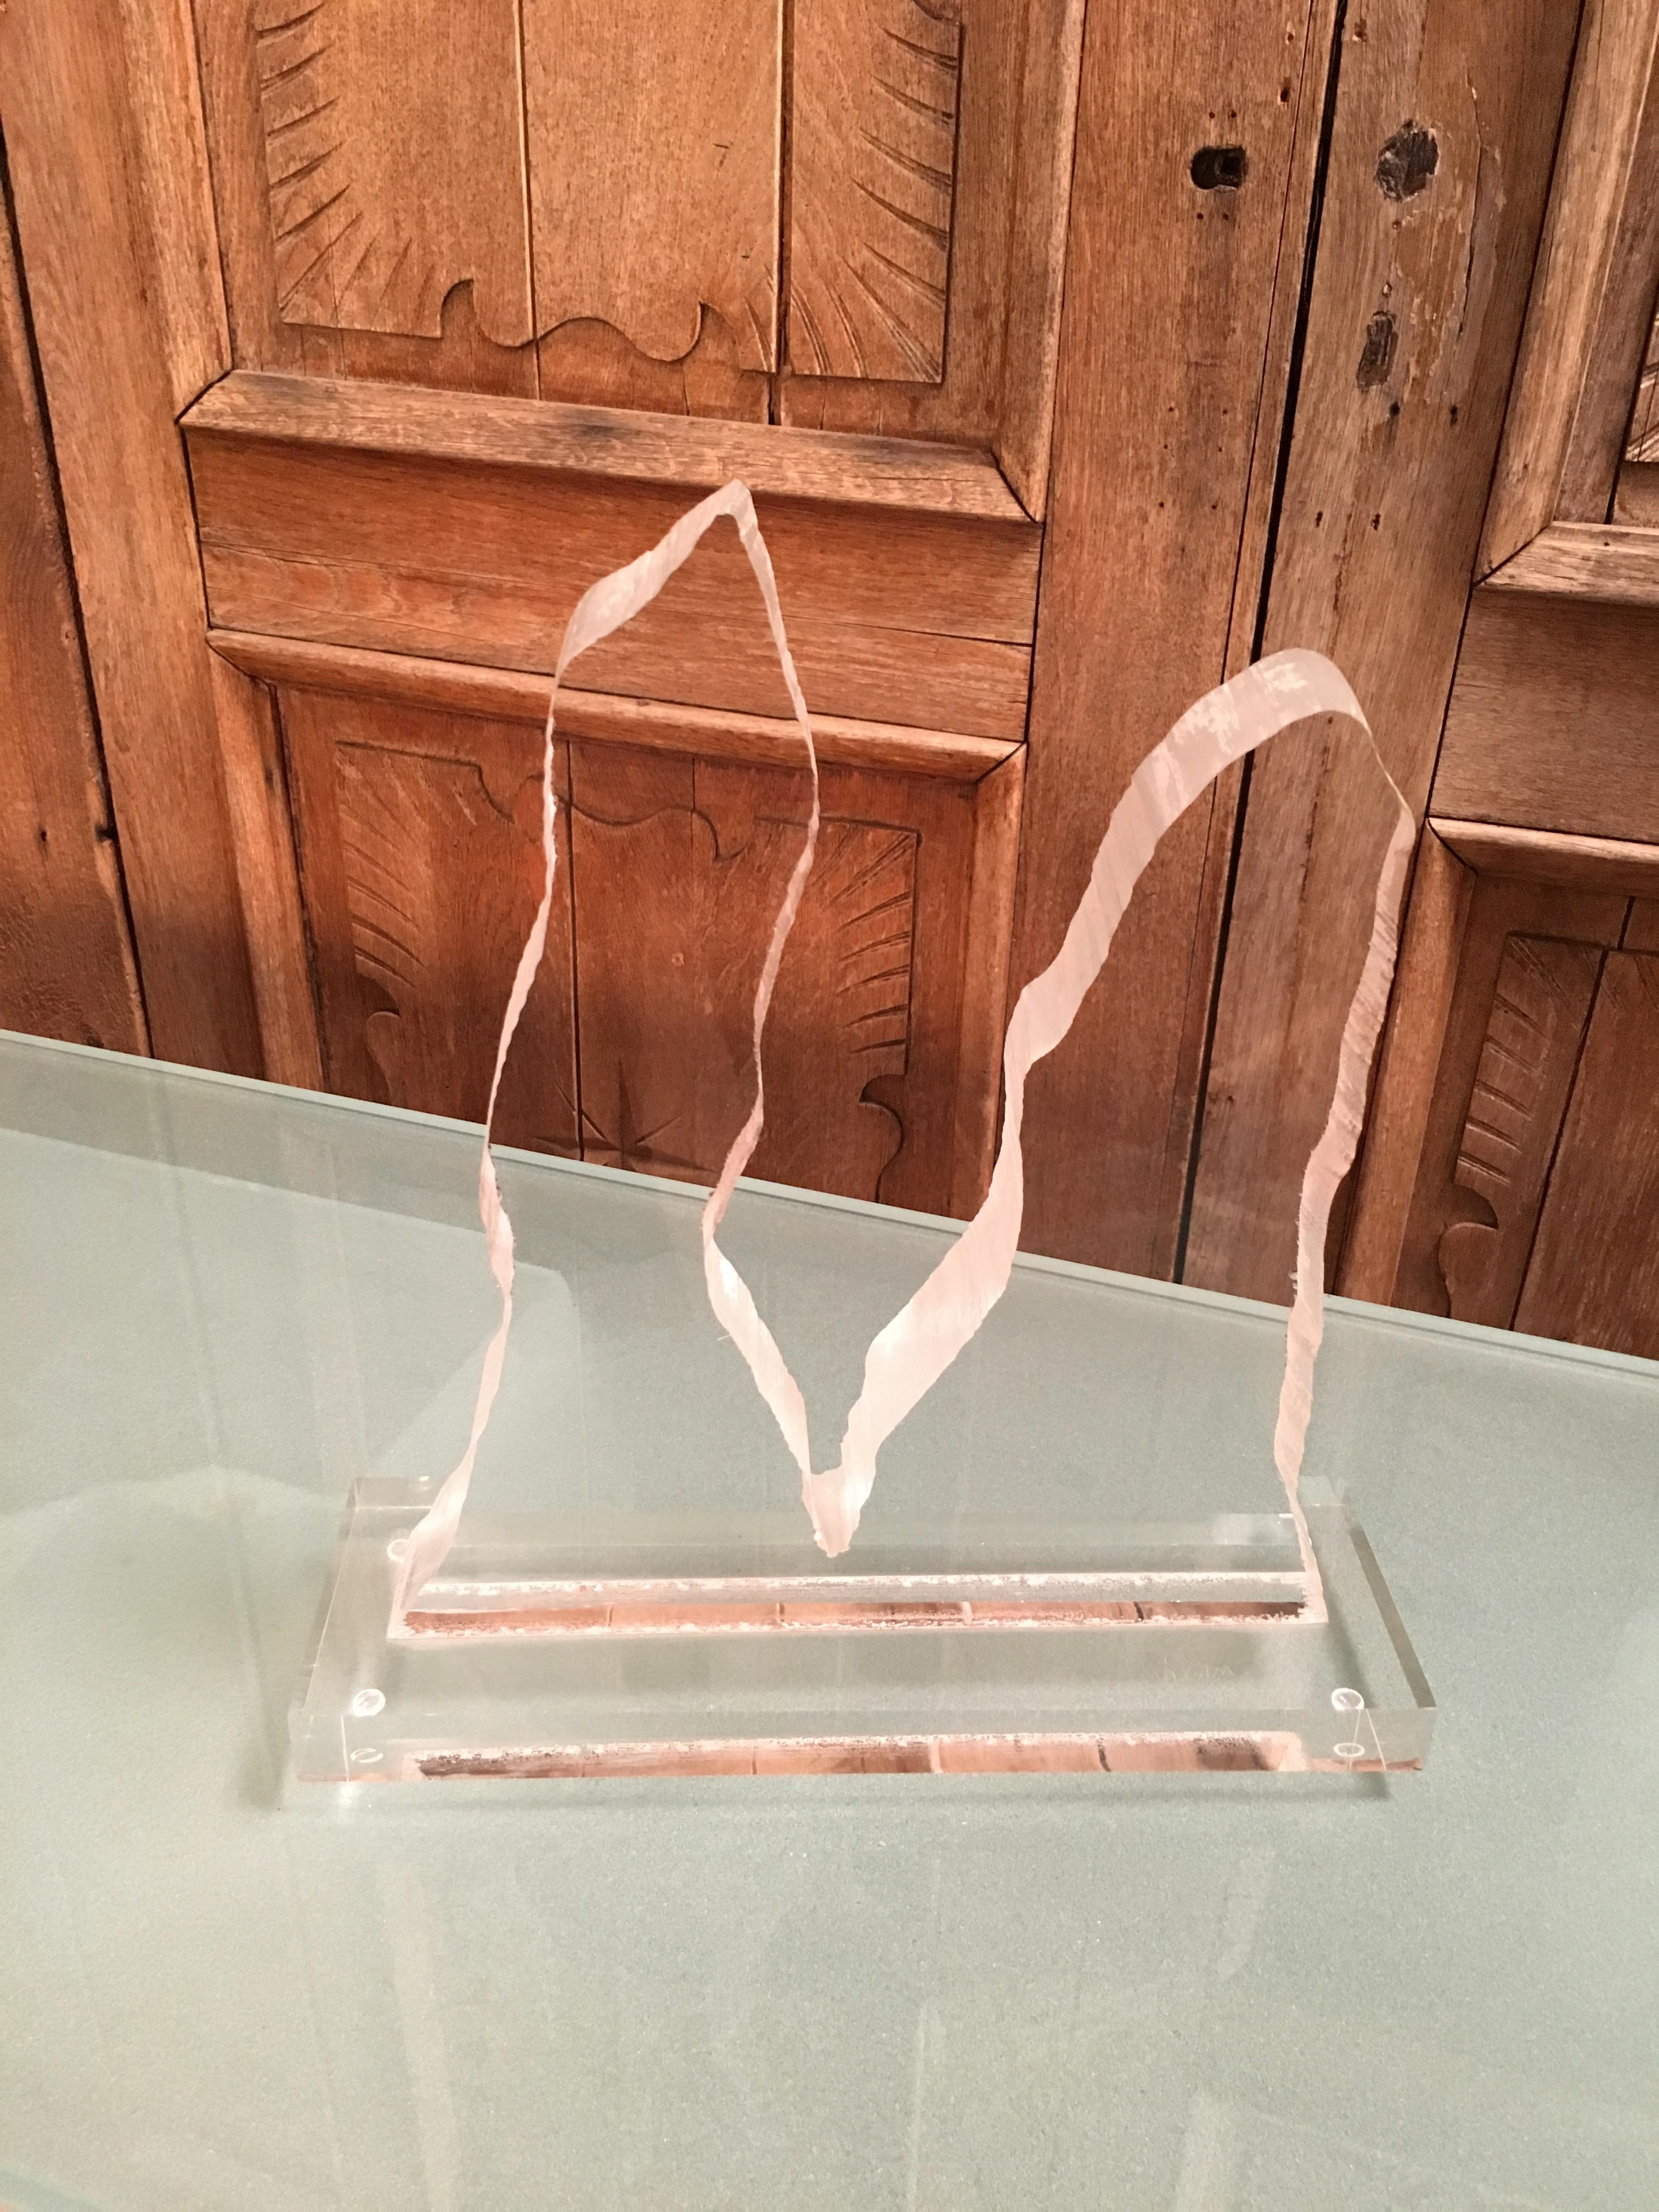 Lucite Sculpture Signed Vaham 88 In Good Condition For Sale In Denton, TX